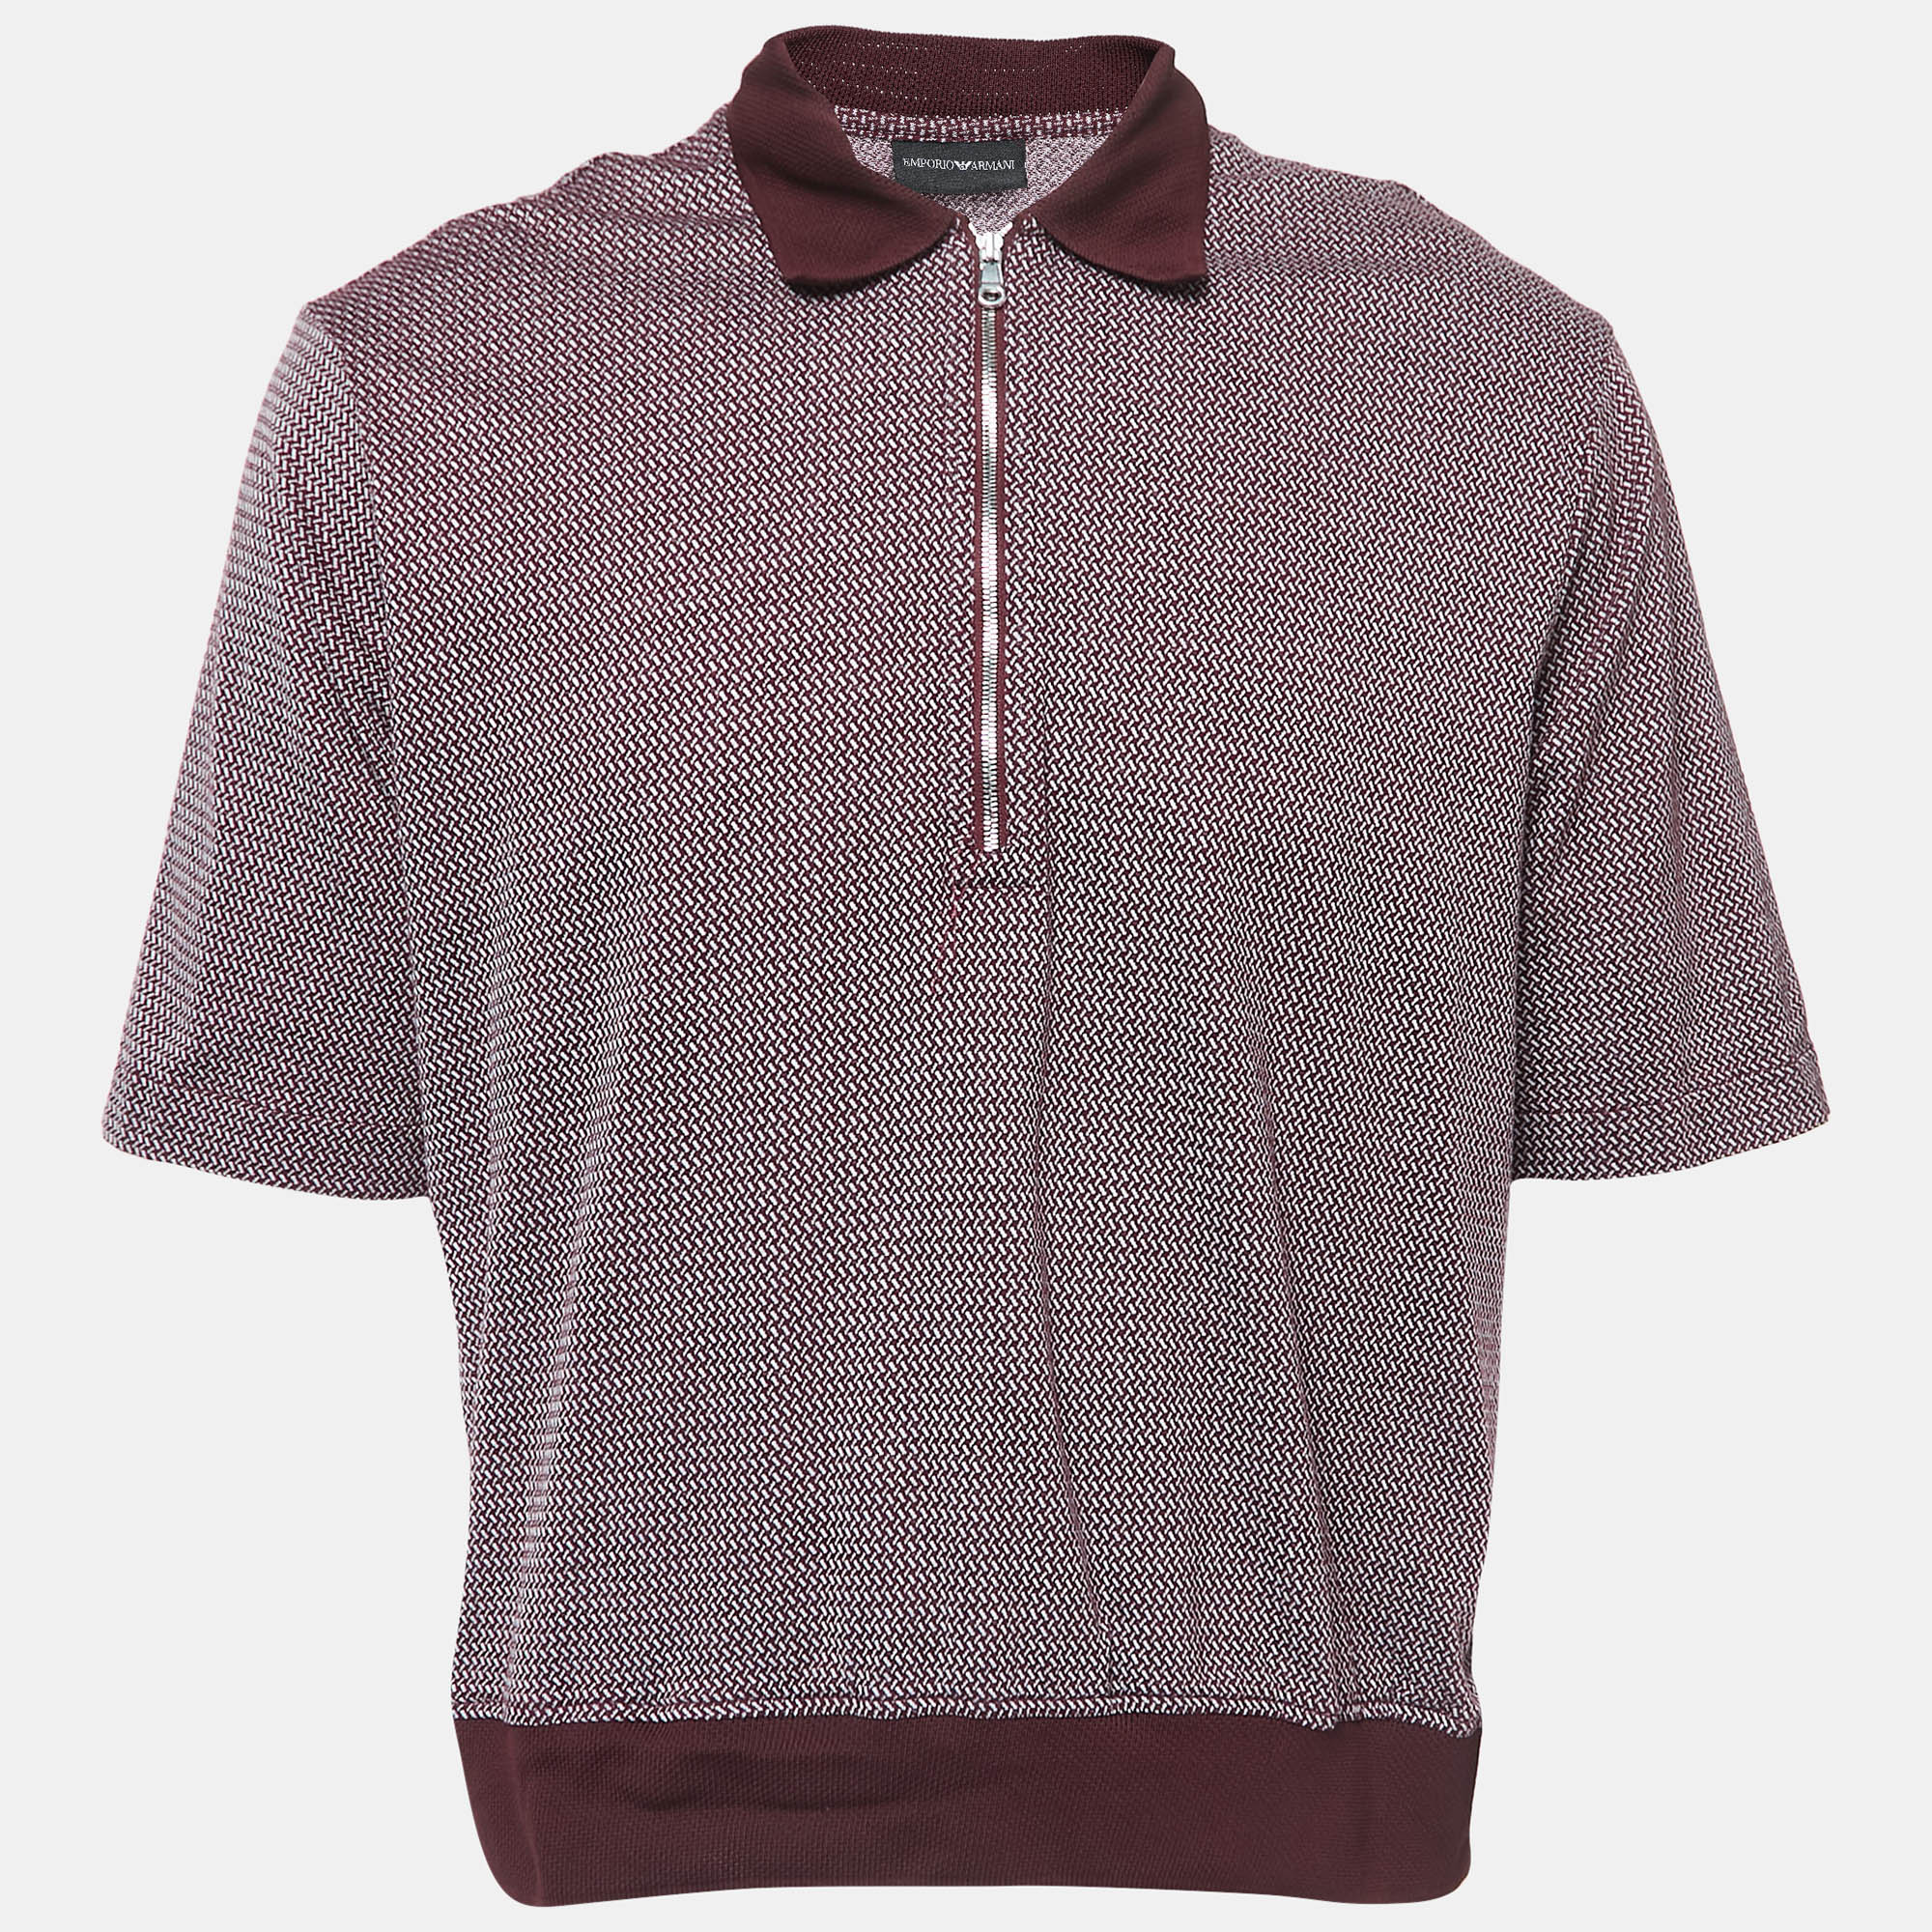 Pre-owned Emporio Armani Burgundy Patterned Cotton Polo T-shirt Xxl